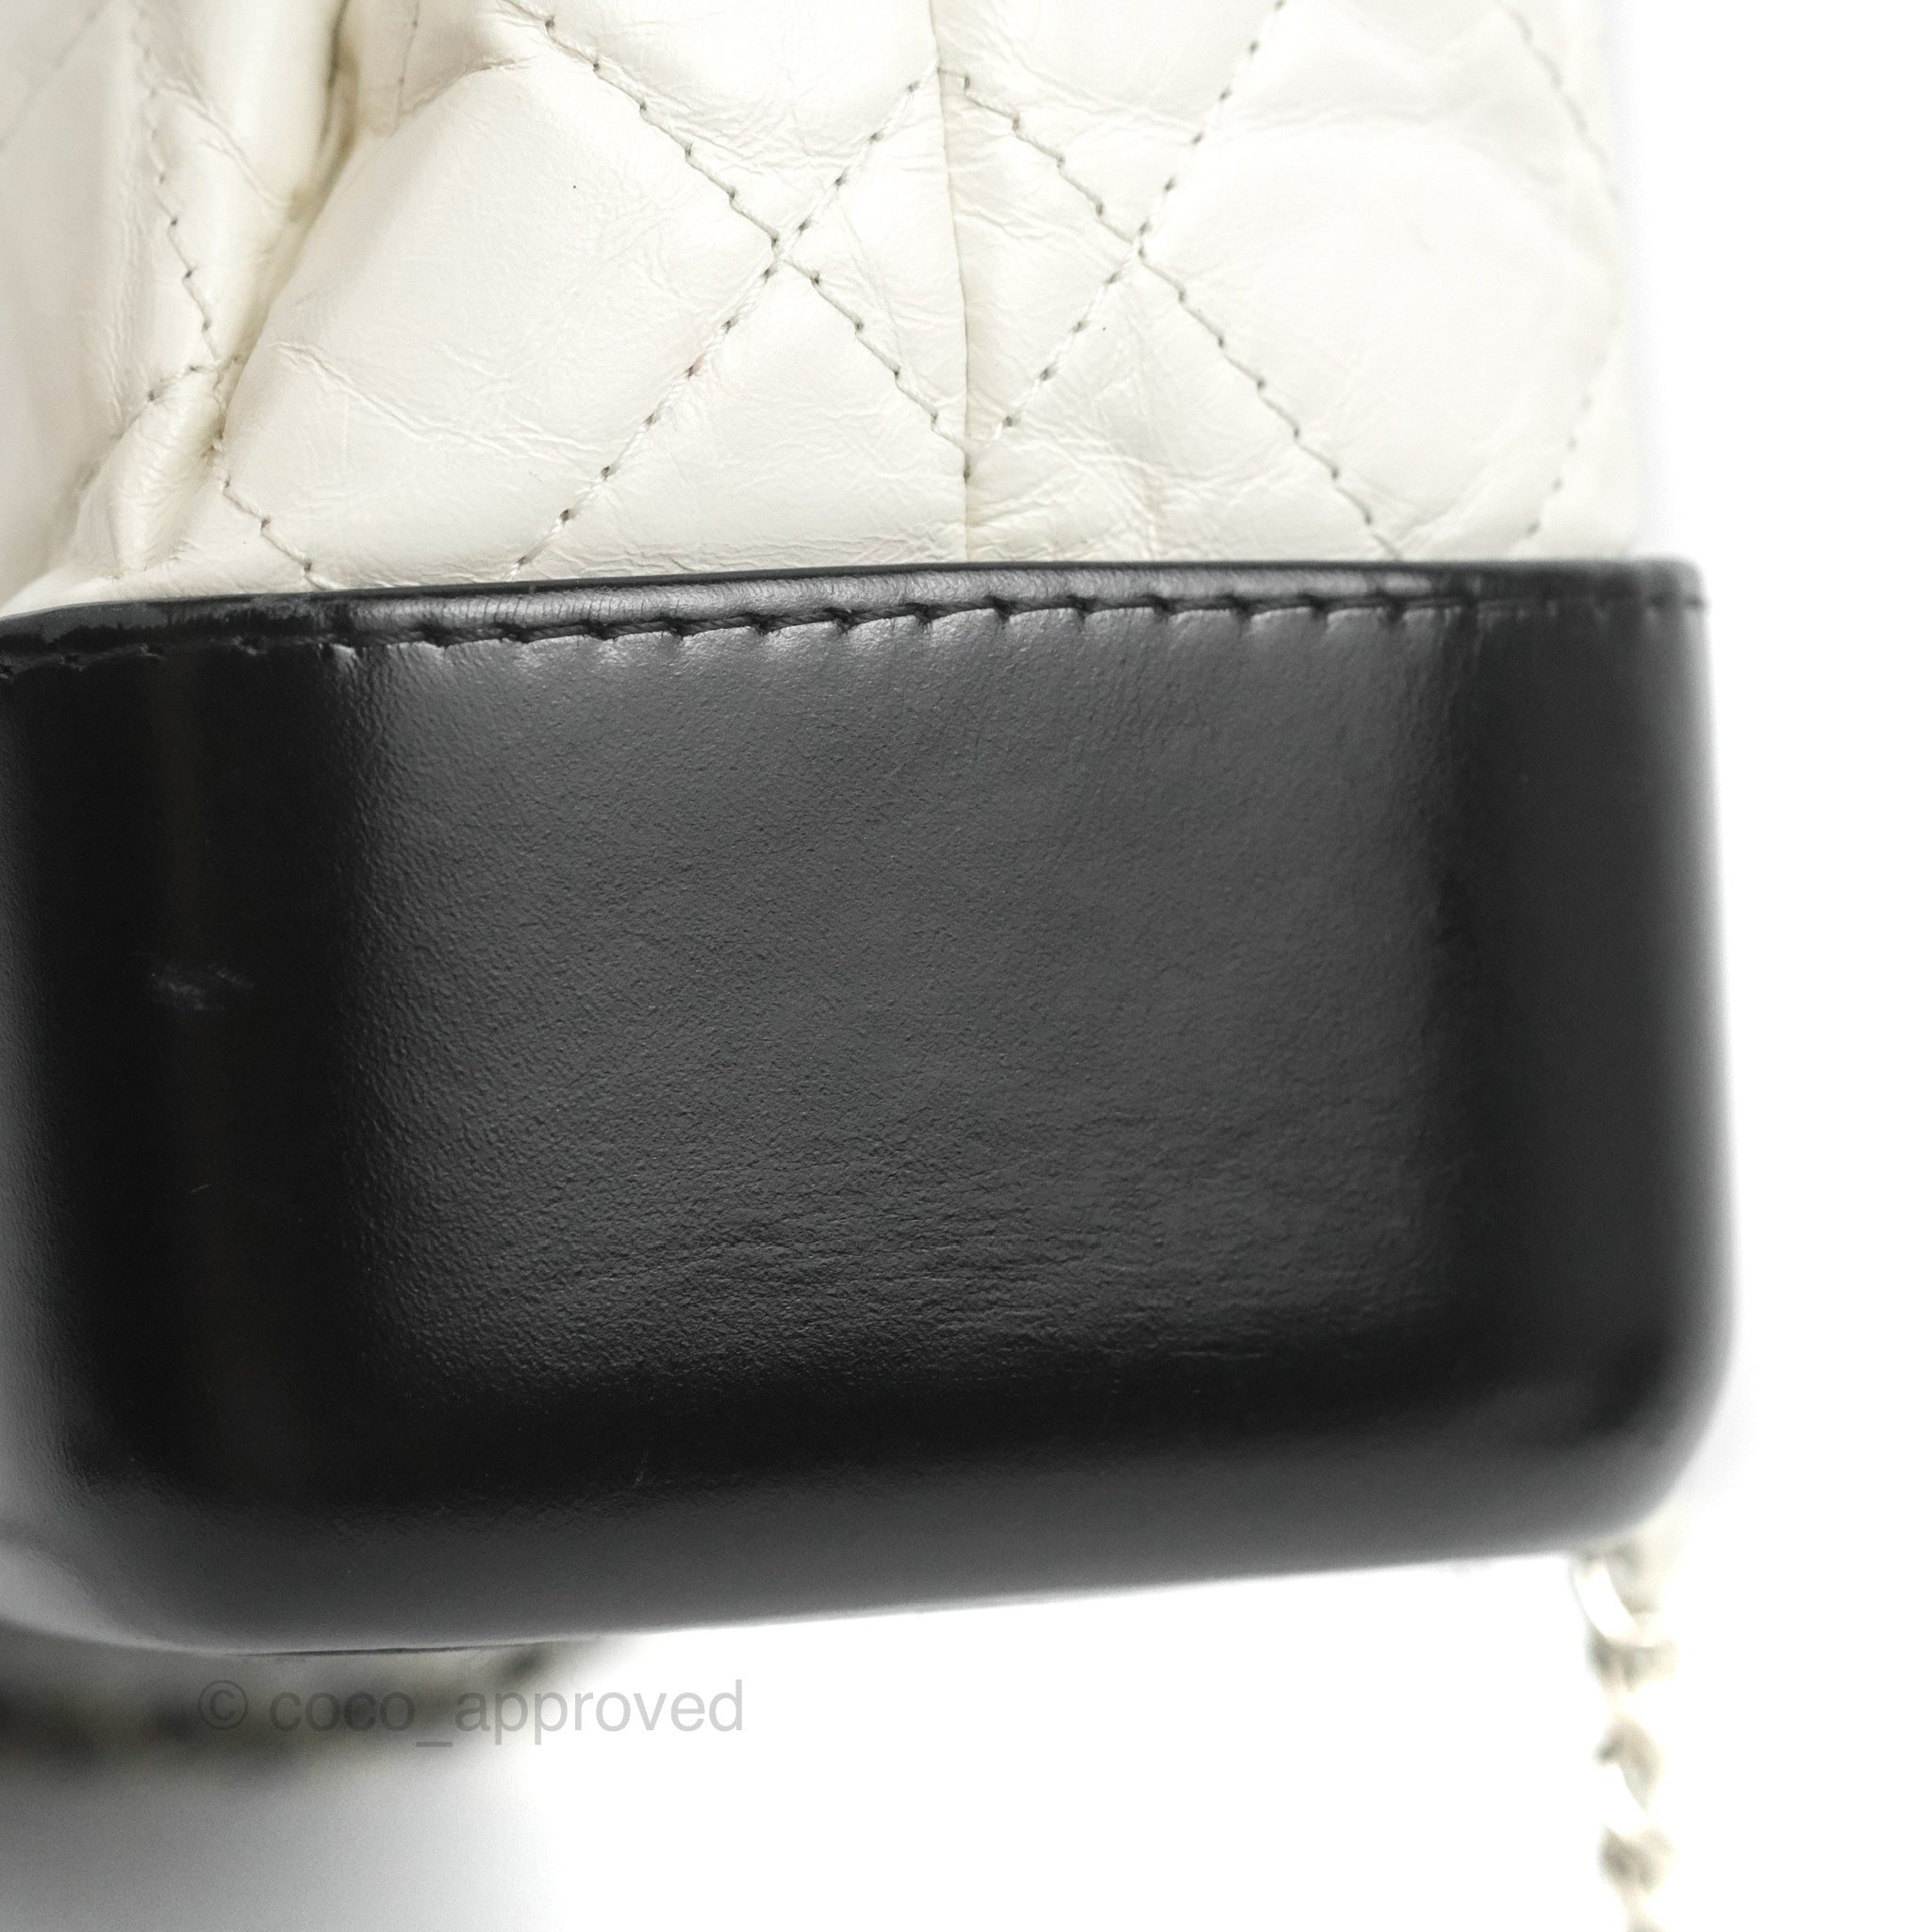 Chanel Small Gabrielle Backpack Beige Black Aged Calfskin – Coco Approved  Studio